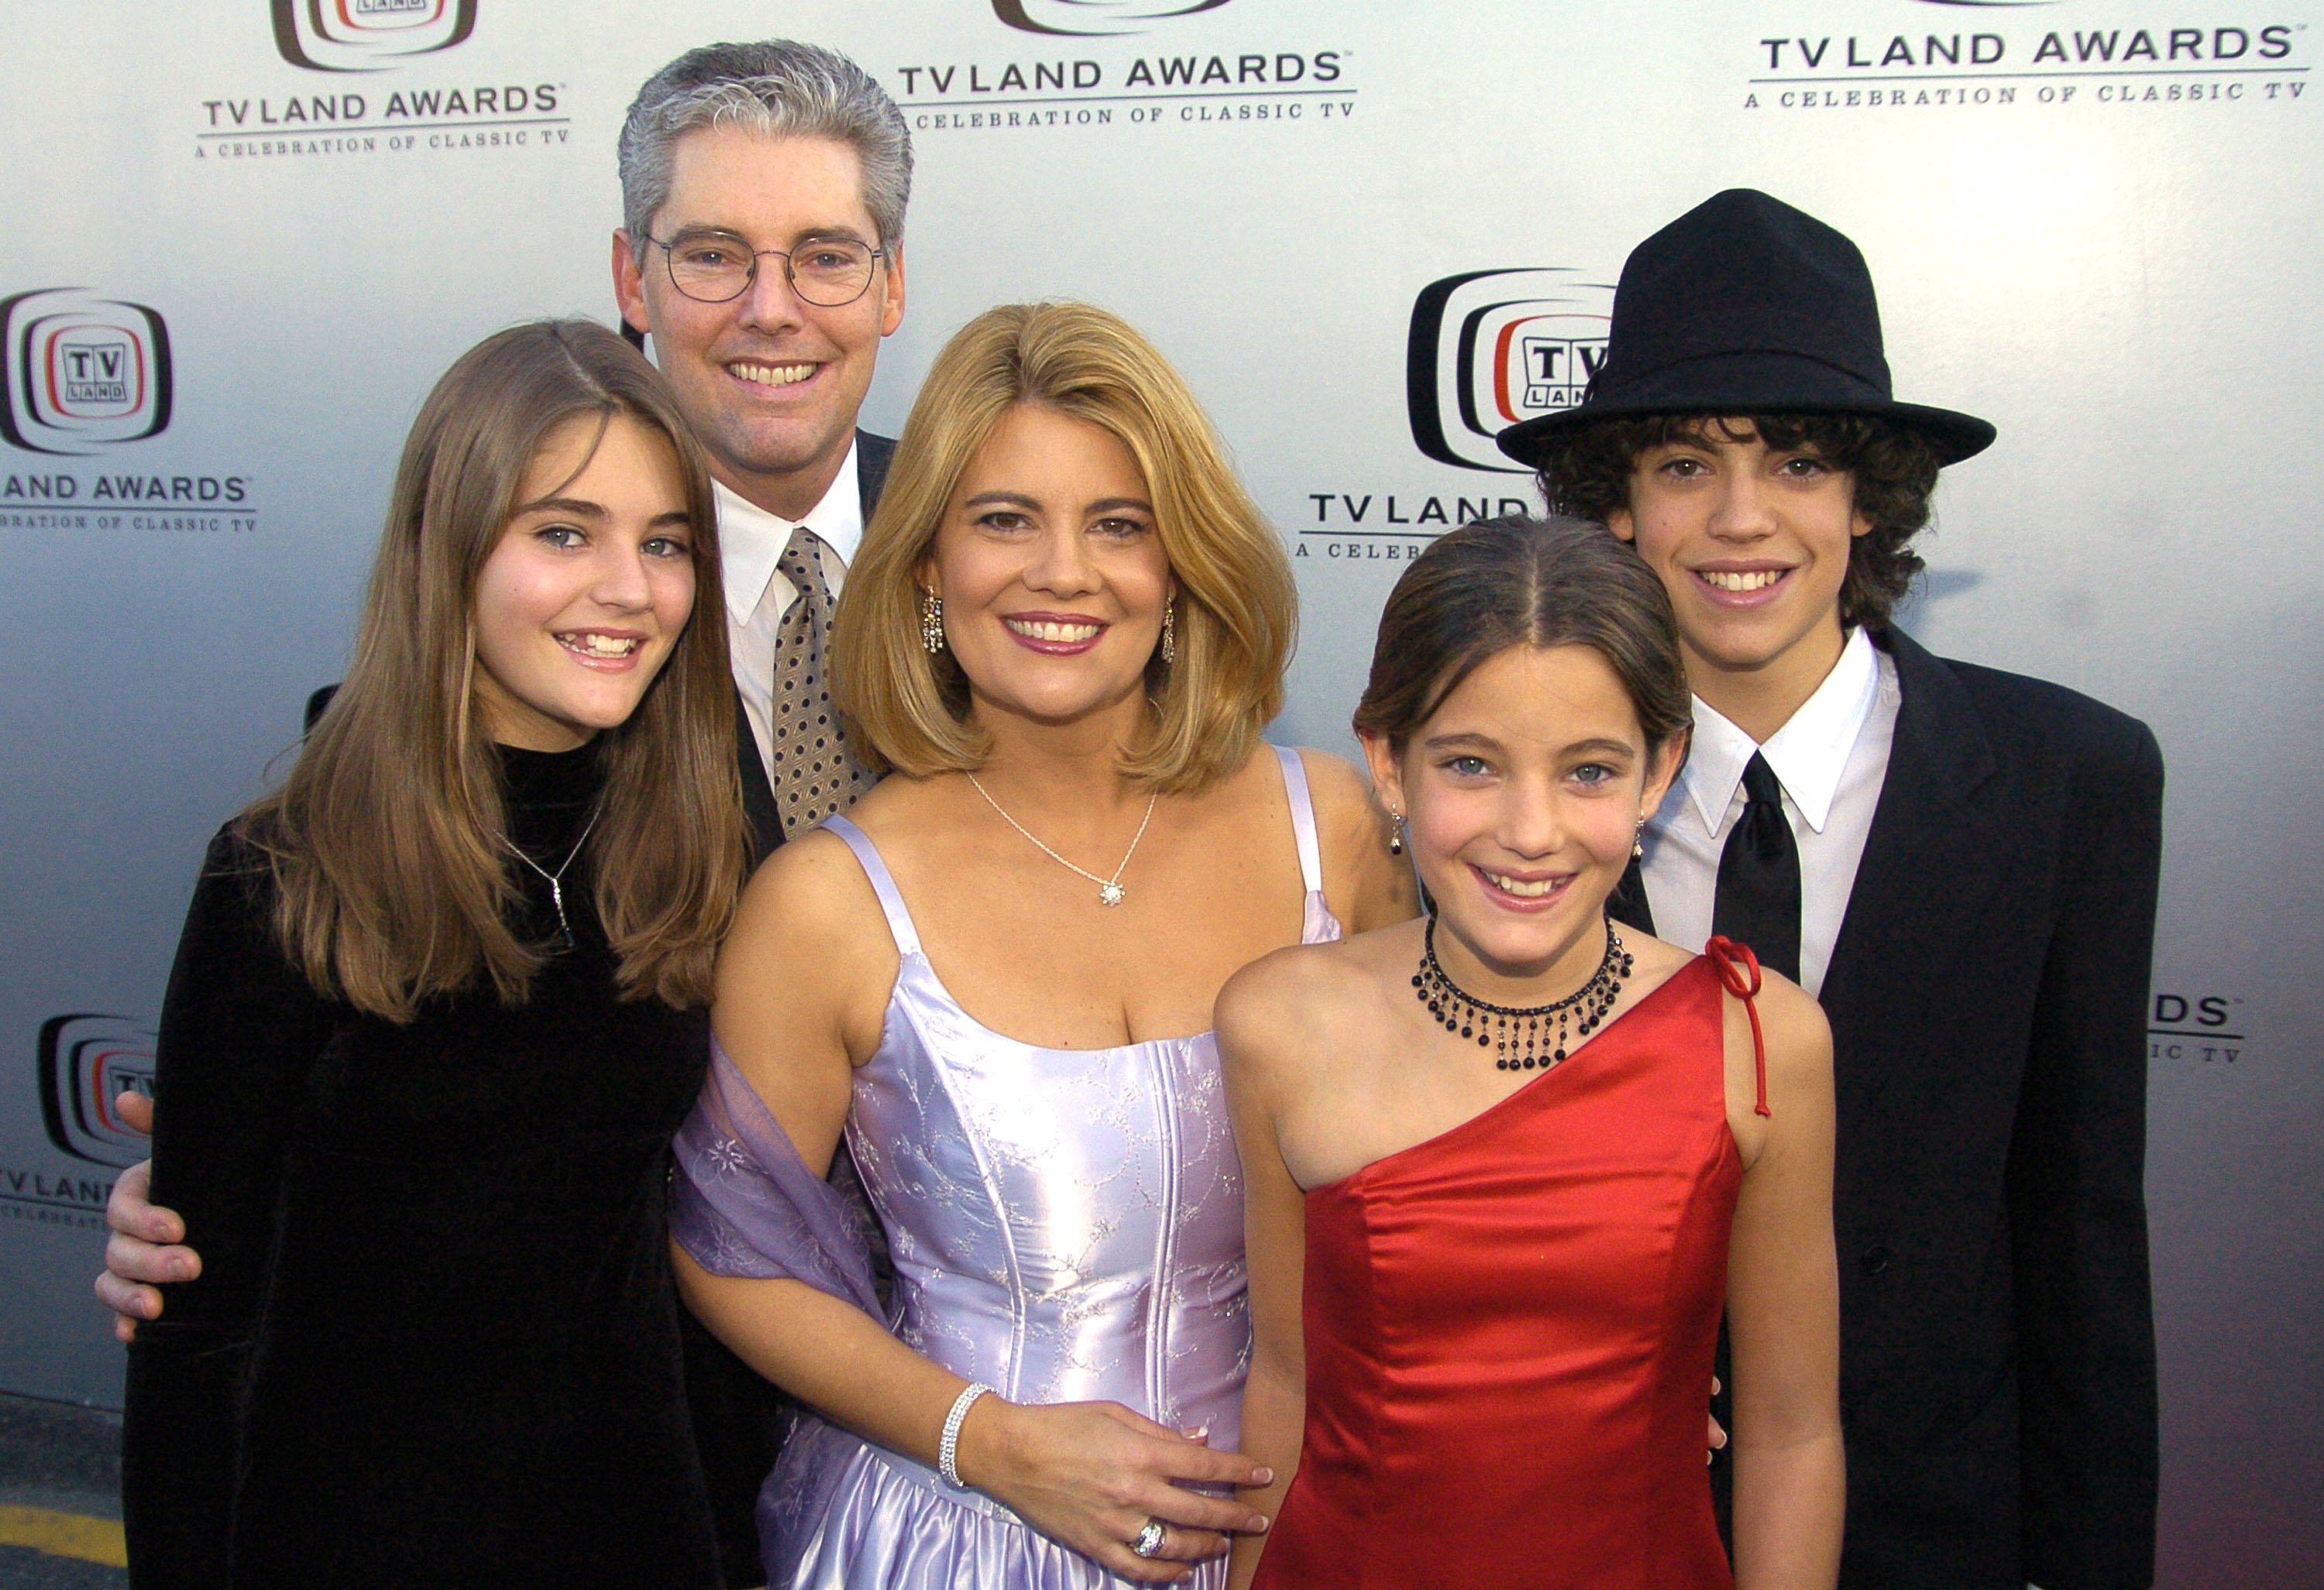 Lisa Whelchel and her family -- then husband Cauble, son Tucker and daughters Haven and  Clancy at The Palladium in Hollywood California in 2004 | Source: Getty Images